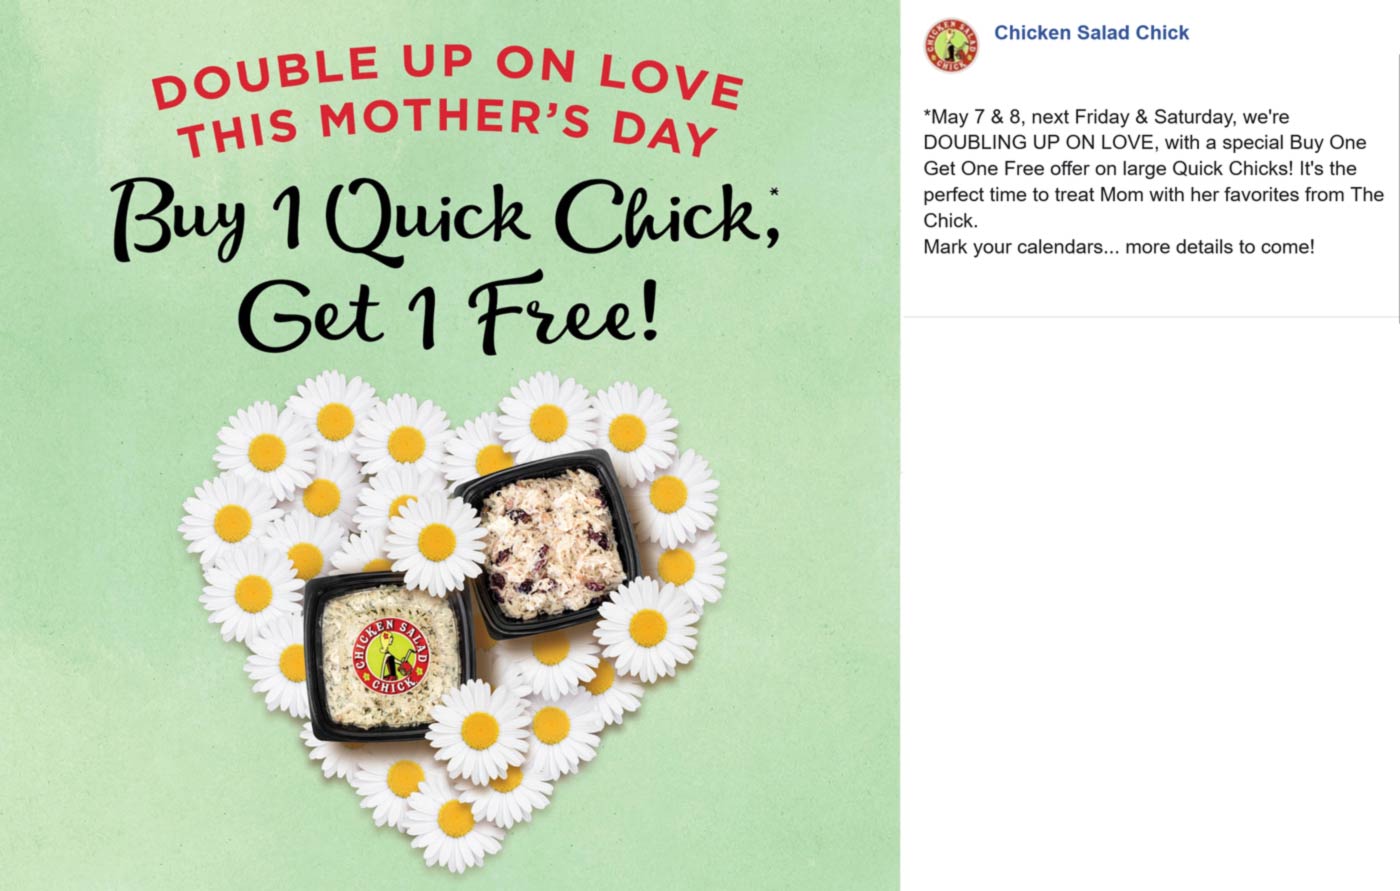 Second quick chick entree free today at Chicken Salad Chick restaurants chickensaladchick The